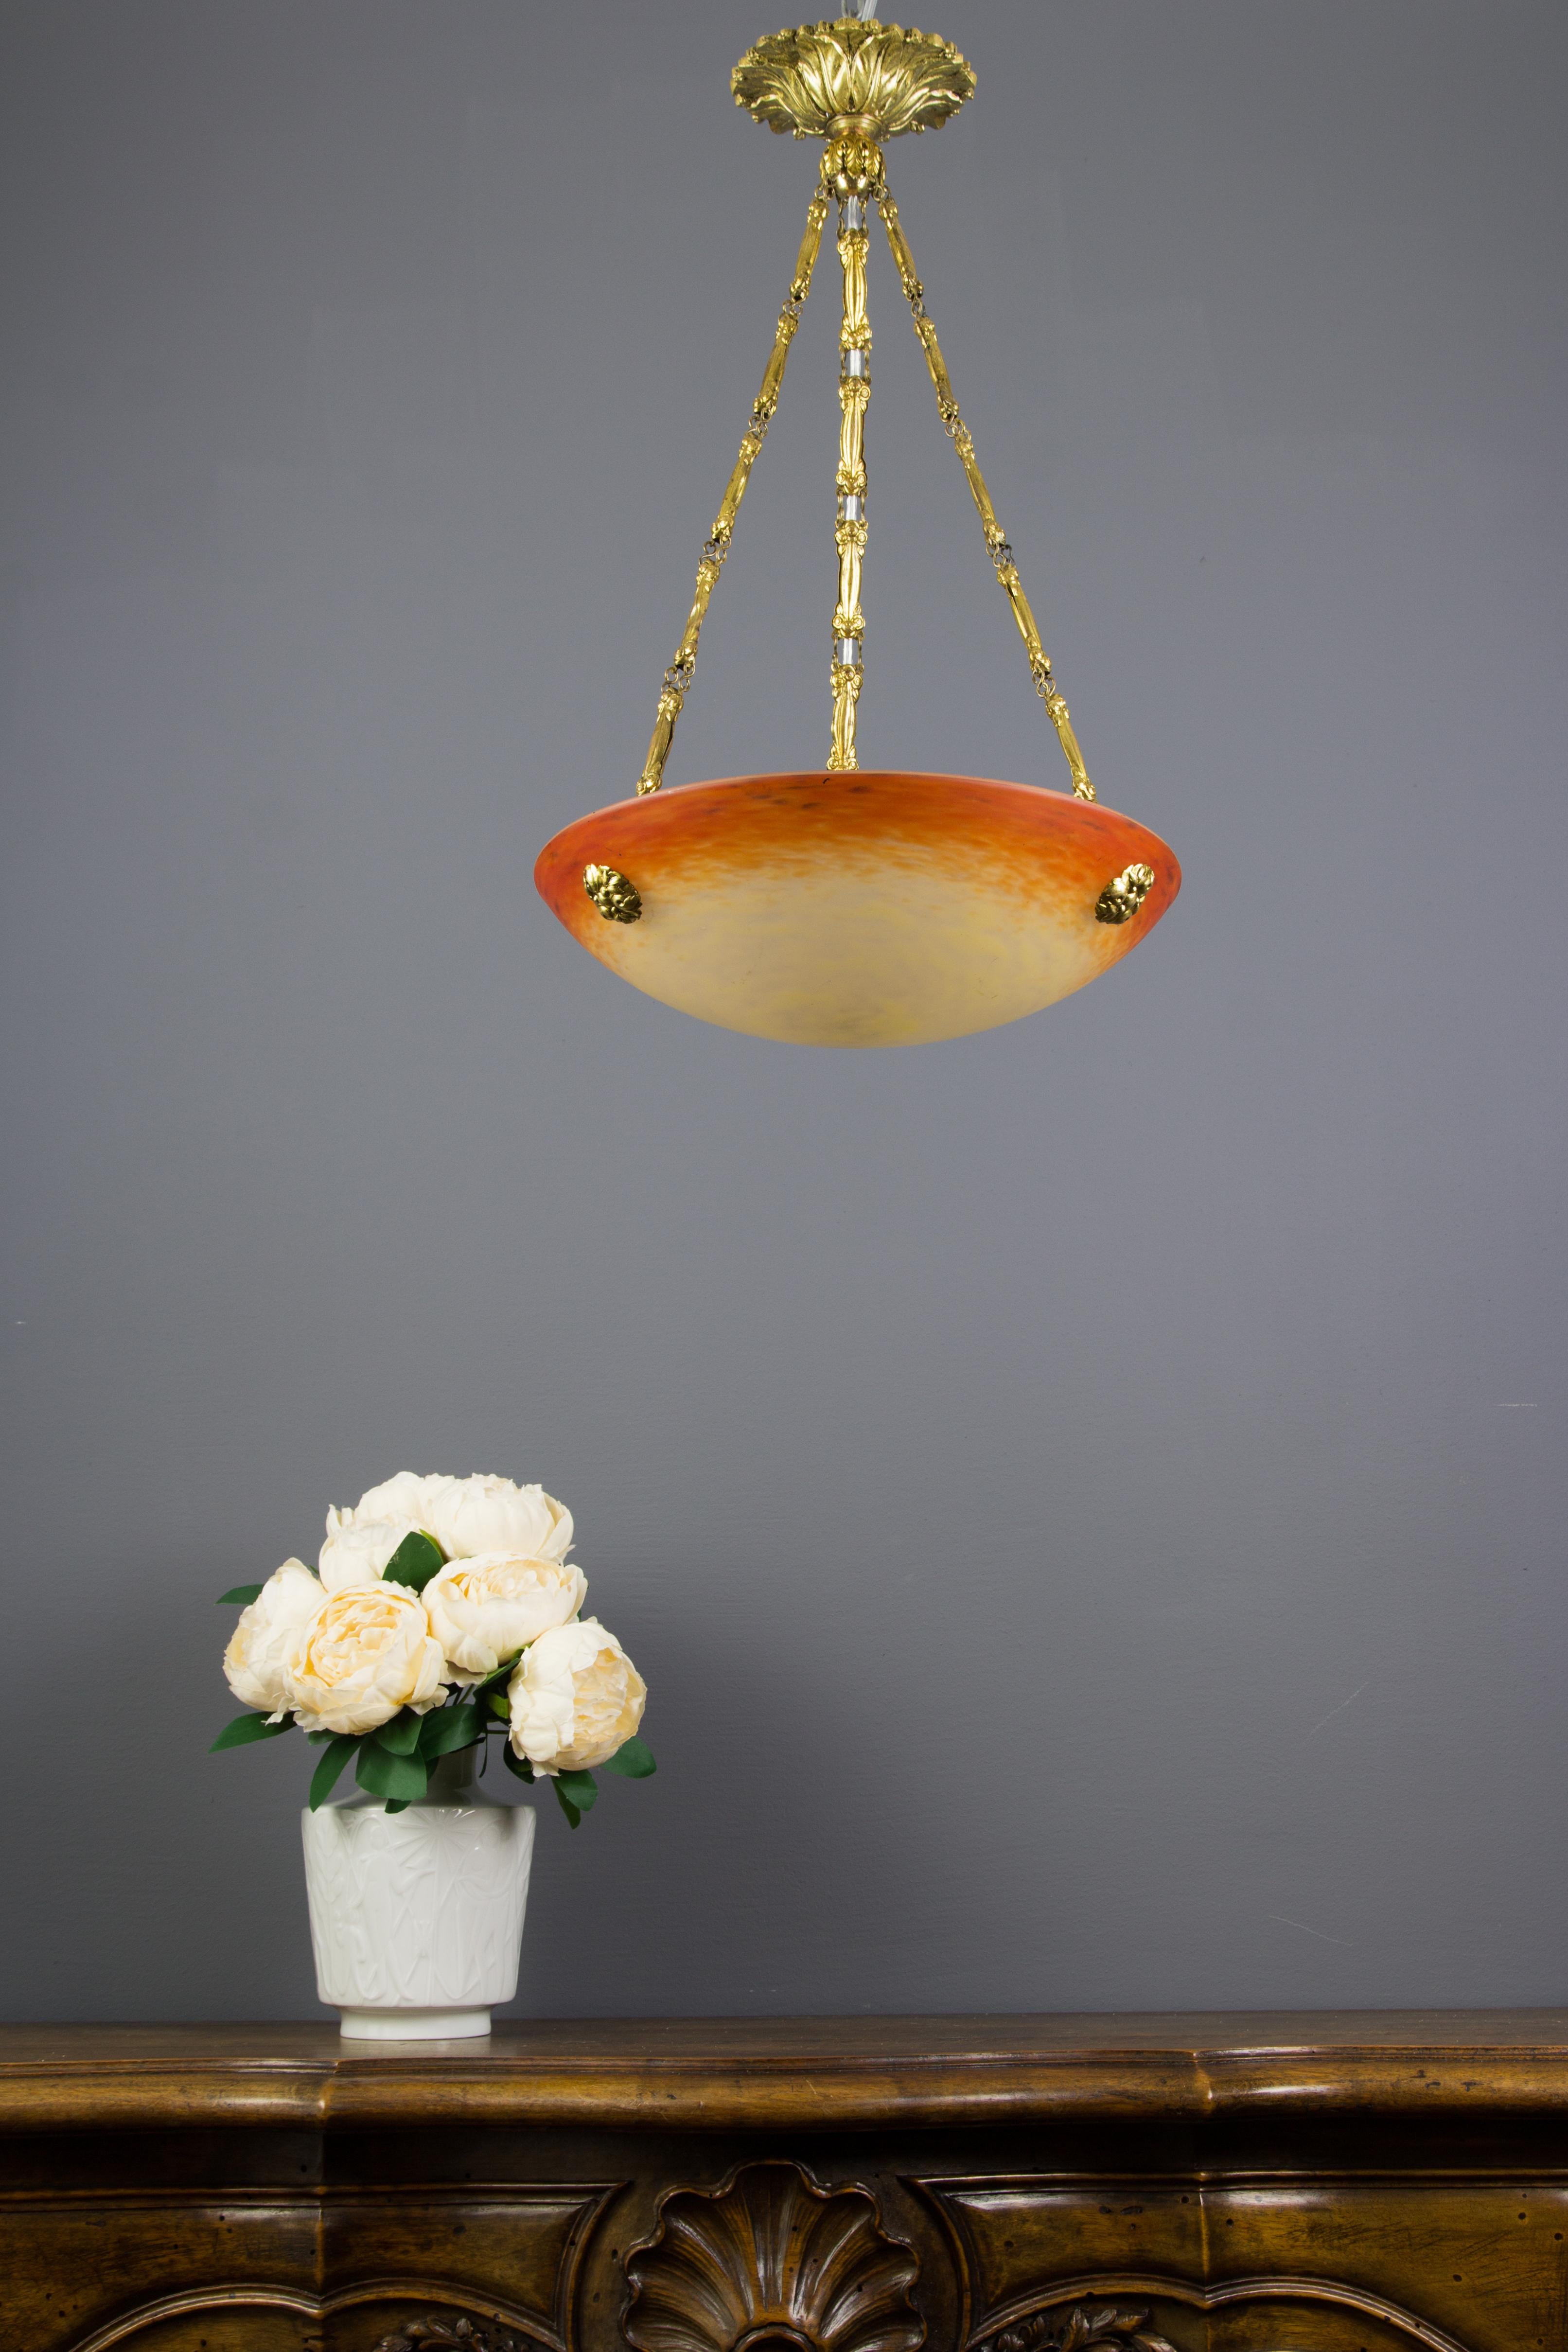 This adorable French Art Nouveau period pendant chandelier features a mottled “Pâte de Verre” art glass shade in orange, yellow, and cream color, signed ”Schneider” by Charles Schneider, hung at an ornate brass and bronze fixture with one socket for